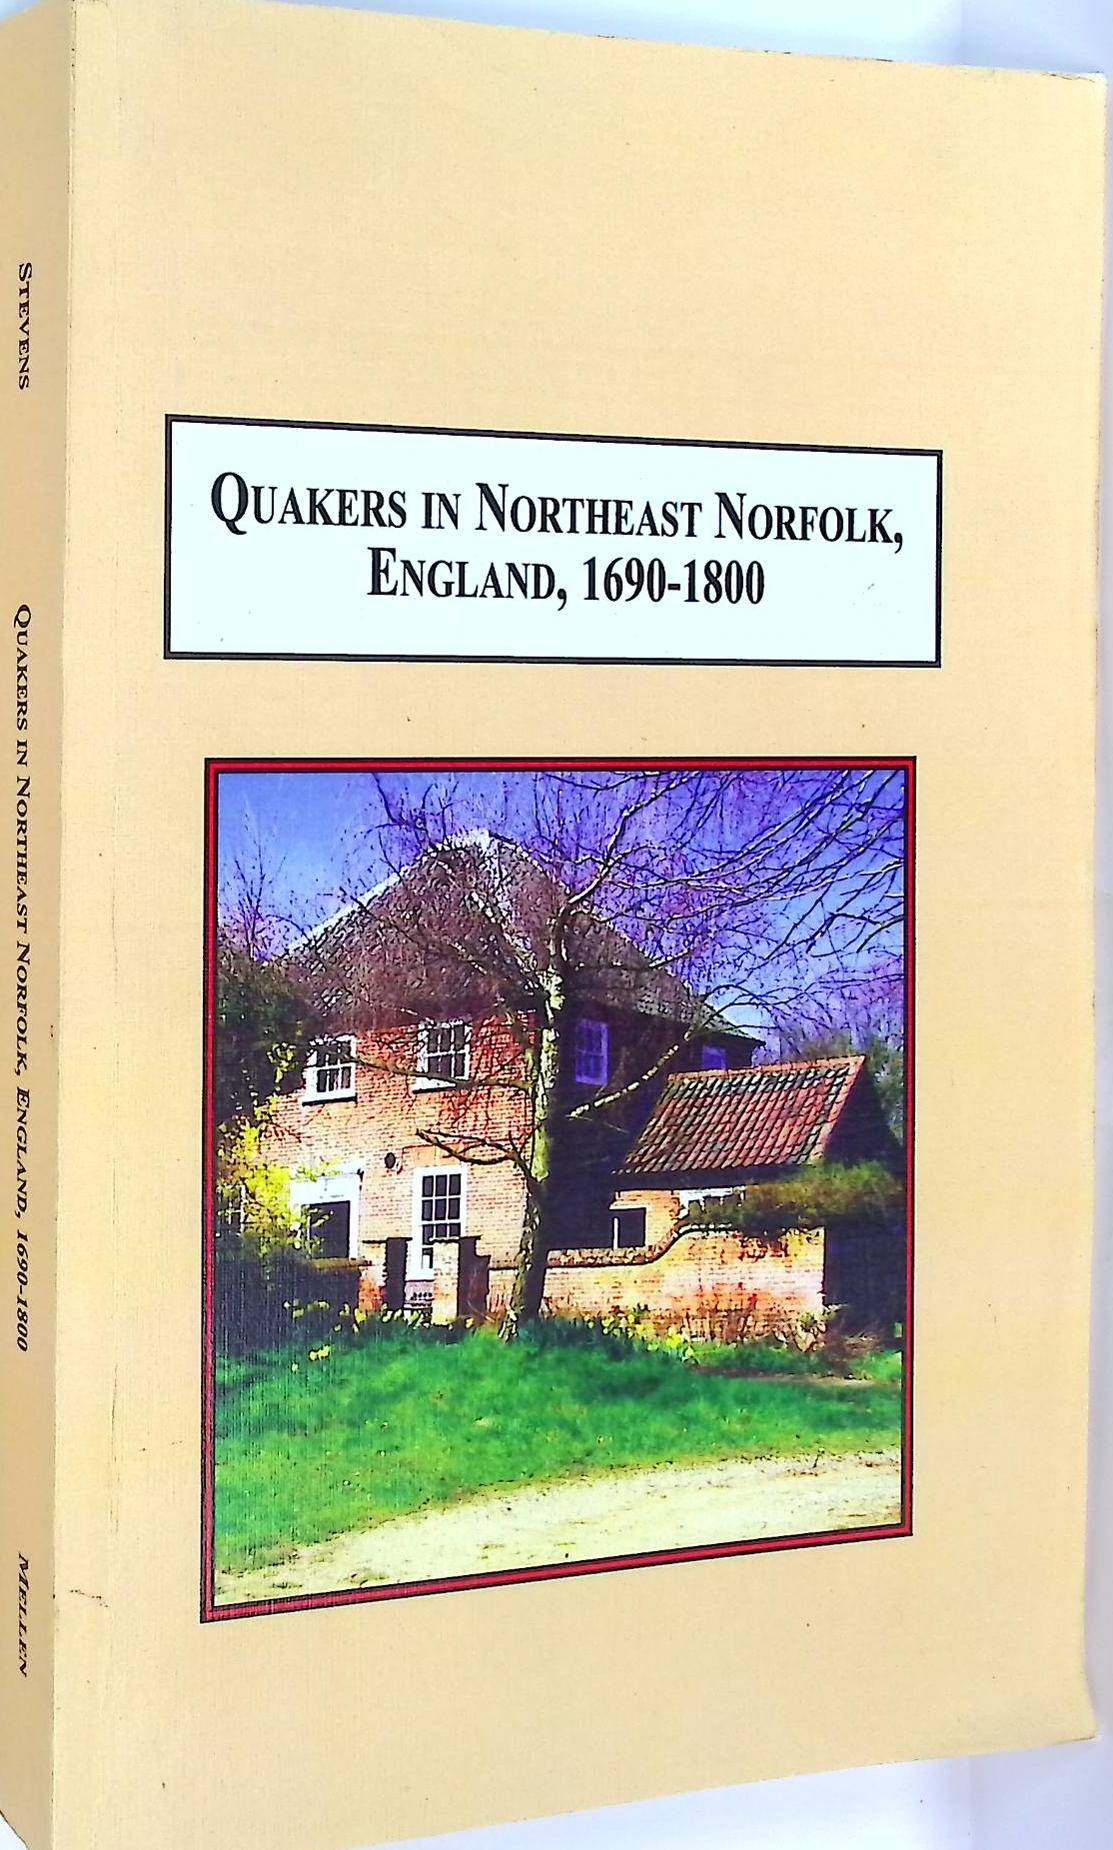 Quakers in Northeast Norfolk, England, 1690-1800